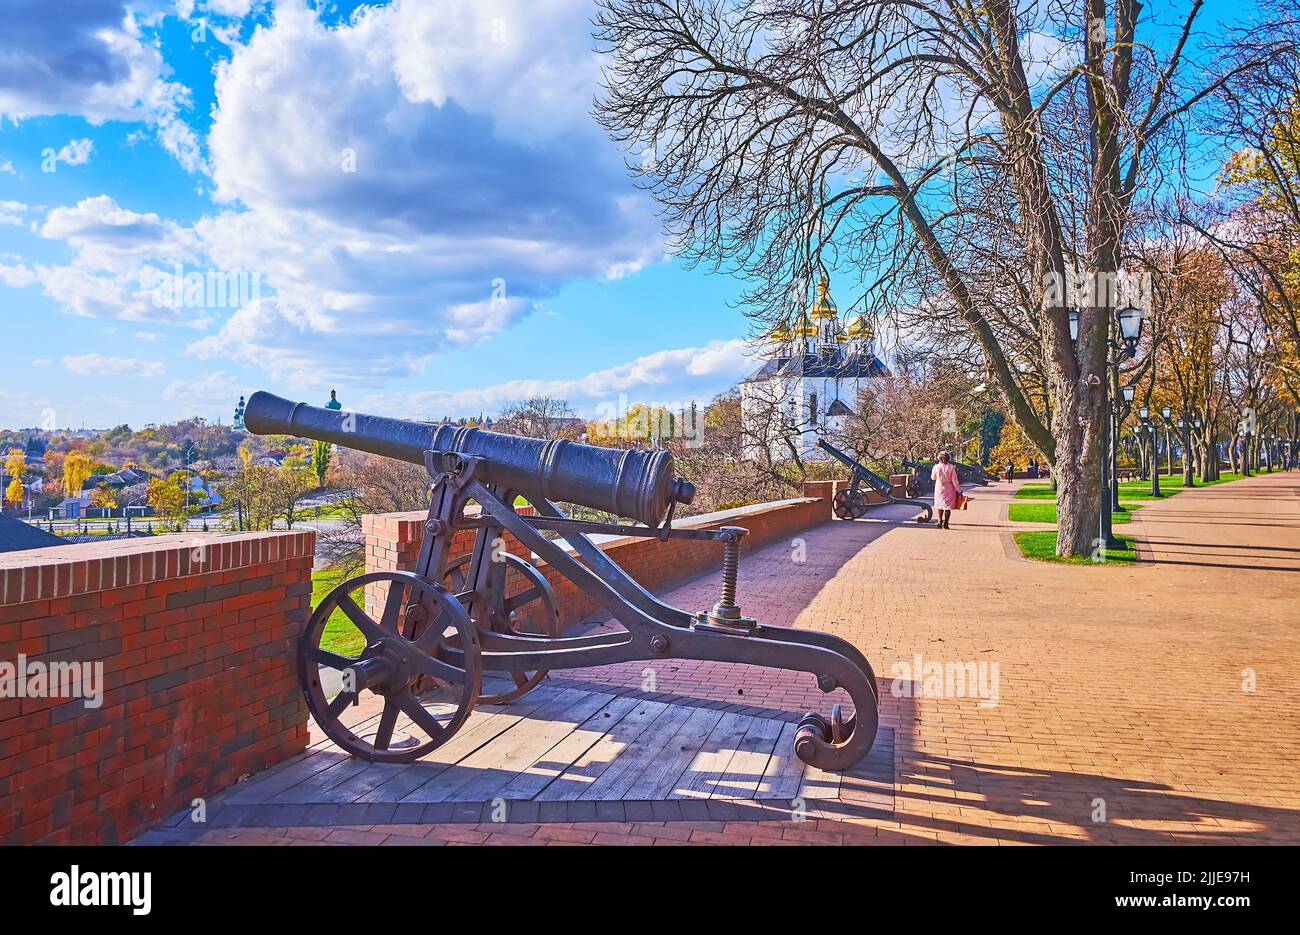 Walk the alley with vintage cannons of Chernihiv Dytynets (Chernigov Citadel) Park with a view on the picturesque golden domed St Catherine's Church, Stock Photo